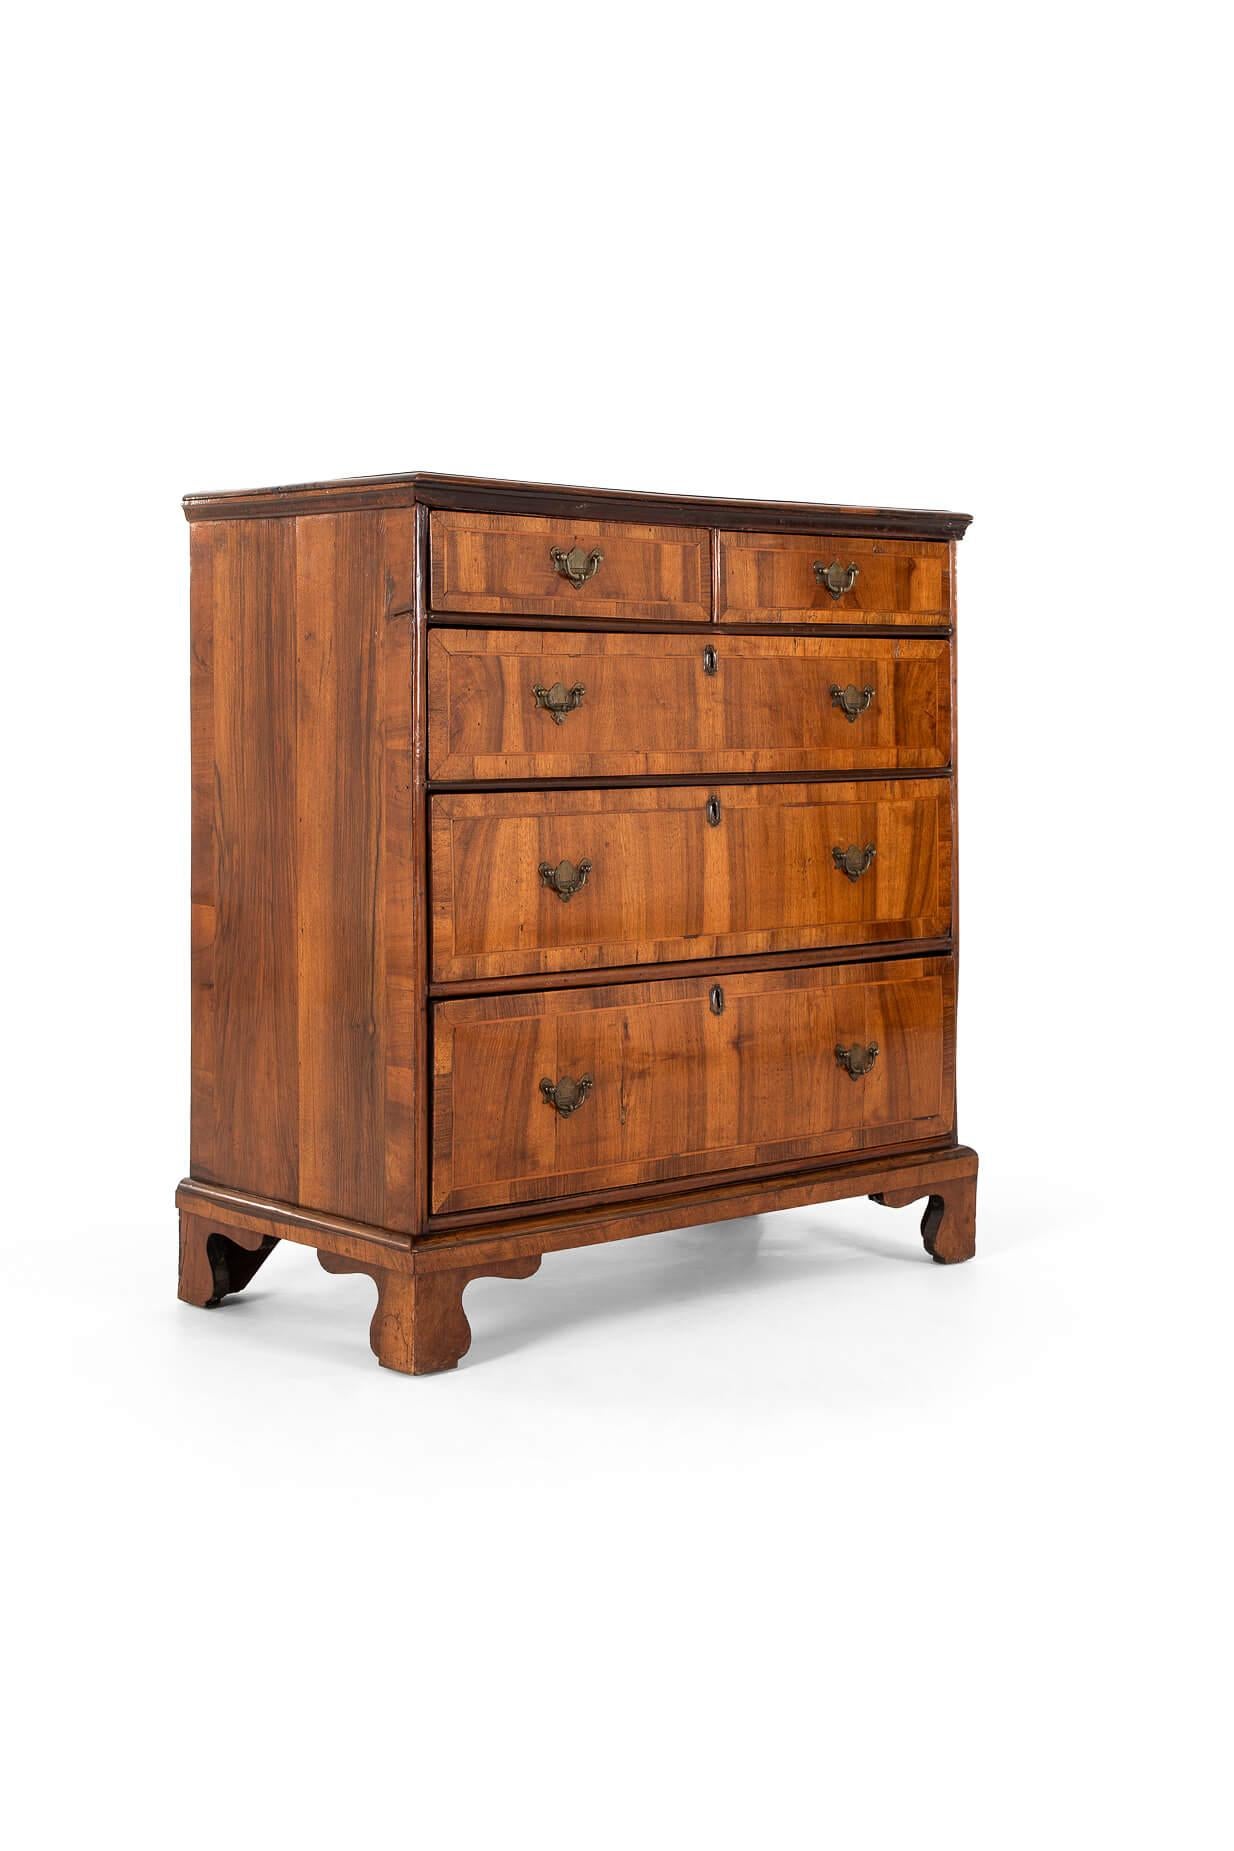 A walnut feather banded chest of drawers in exceptional condition.

Two short over three graduating drawers with brass handles and escutcheons.

Raised on bracket feet with a shapely plinth base.

With superb colour and patination, this is a